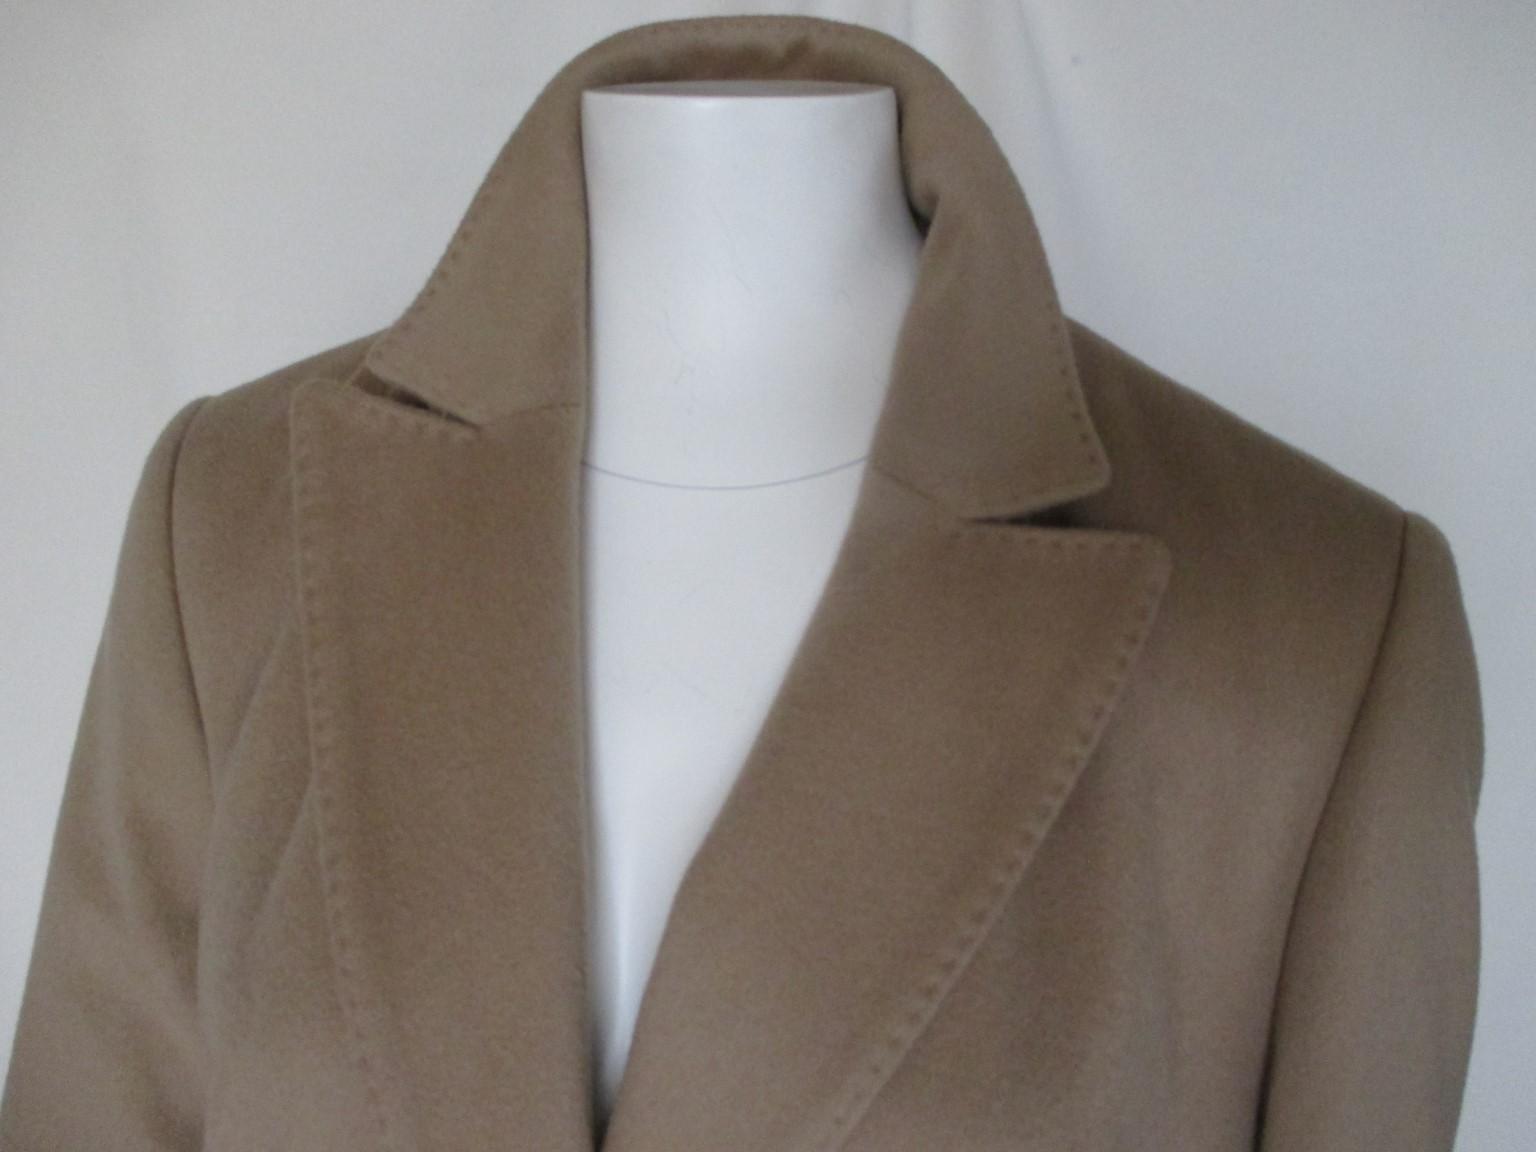 This coat is designed with high quality Loro Piana superfine virgin wool fabric for Basler.
With 2 pockets and 1 inside pocket with zipper, single breasted with 3 buttons, fully lined.
Luxurious silky wool of rich camel color with great shine!

Size